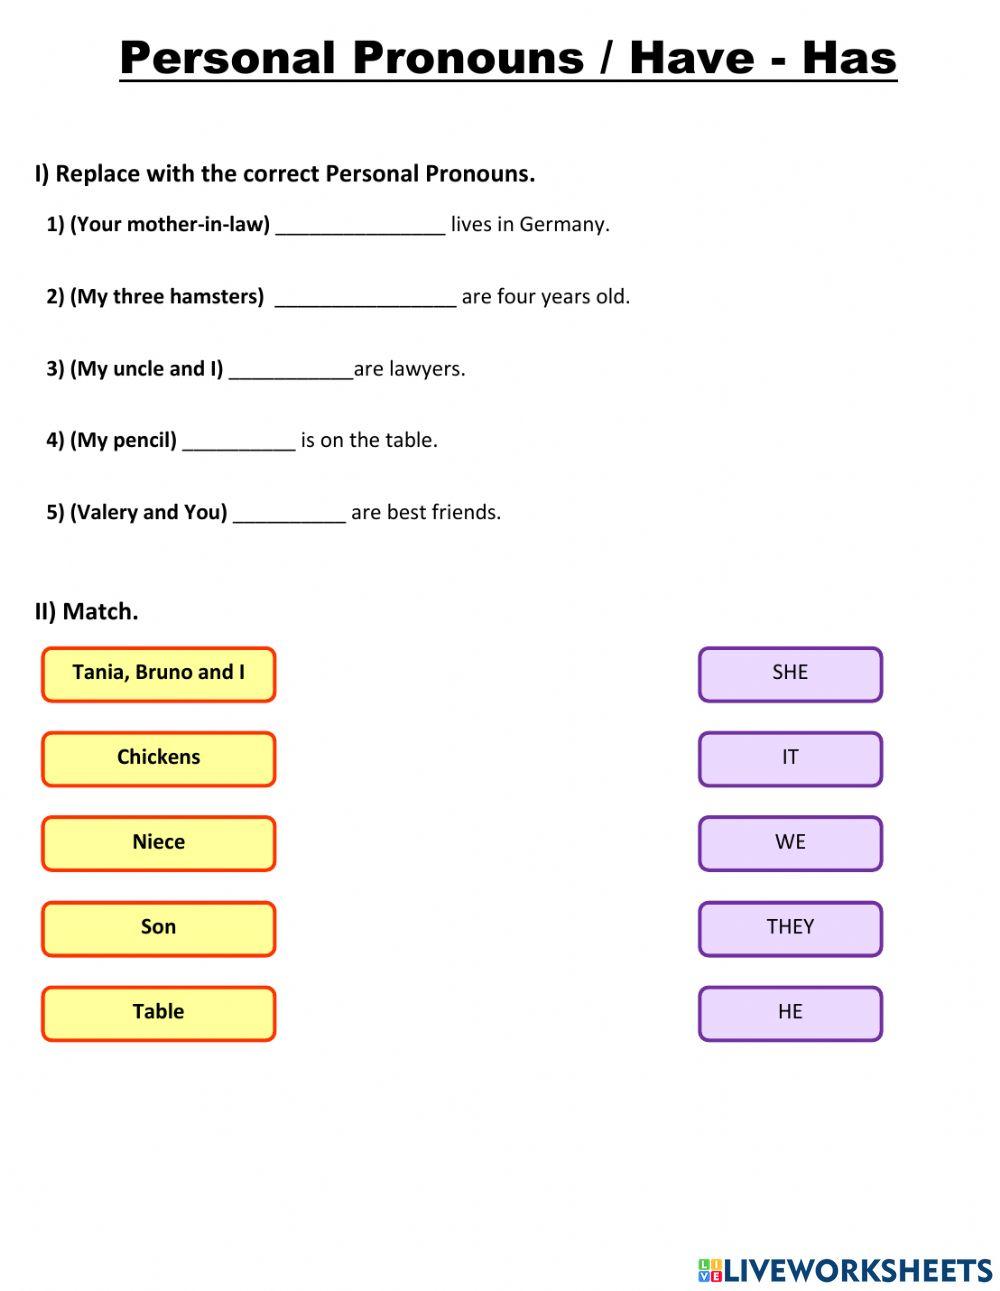 Personal Pronouns - Have-Has